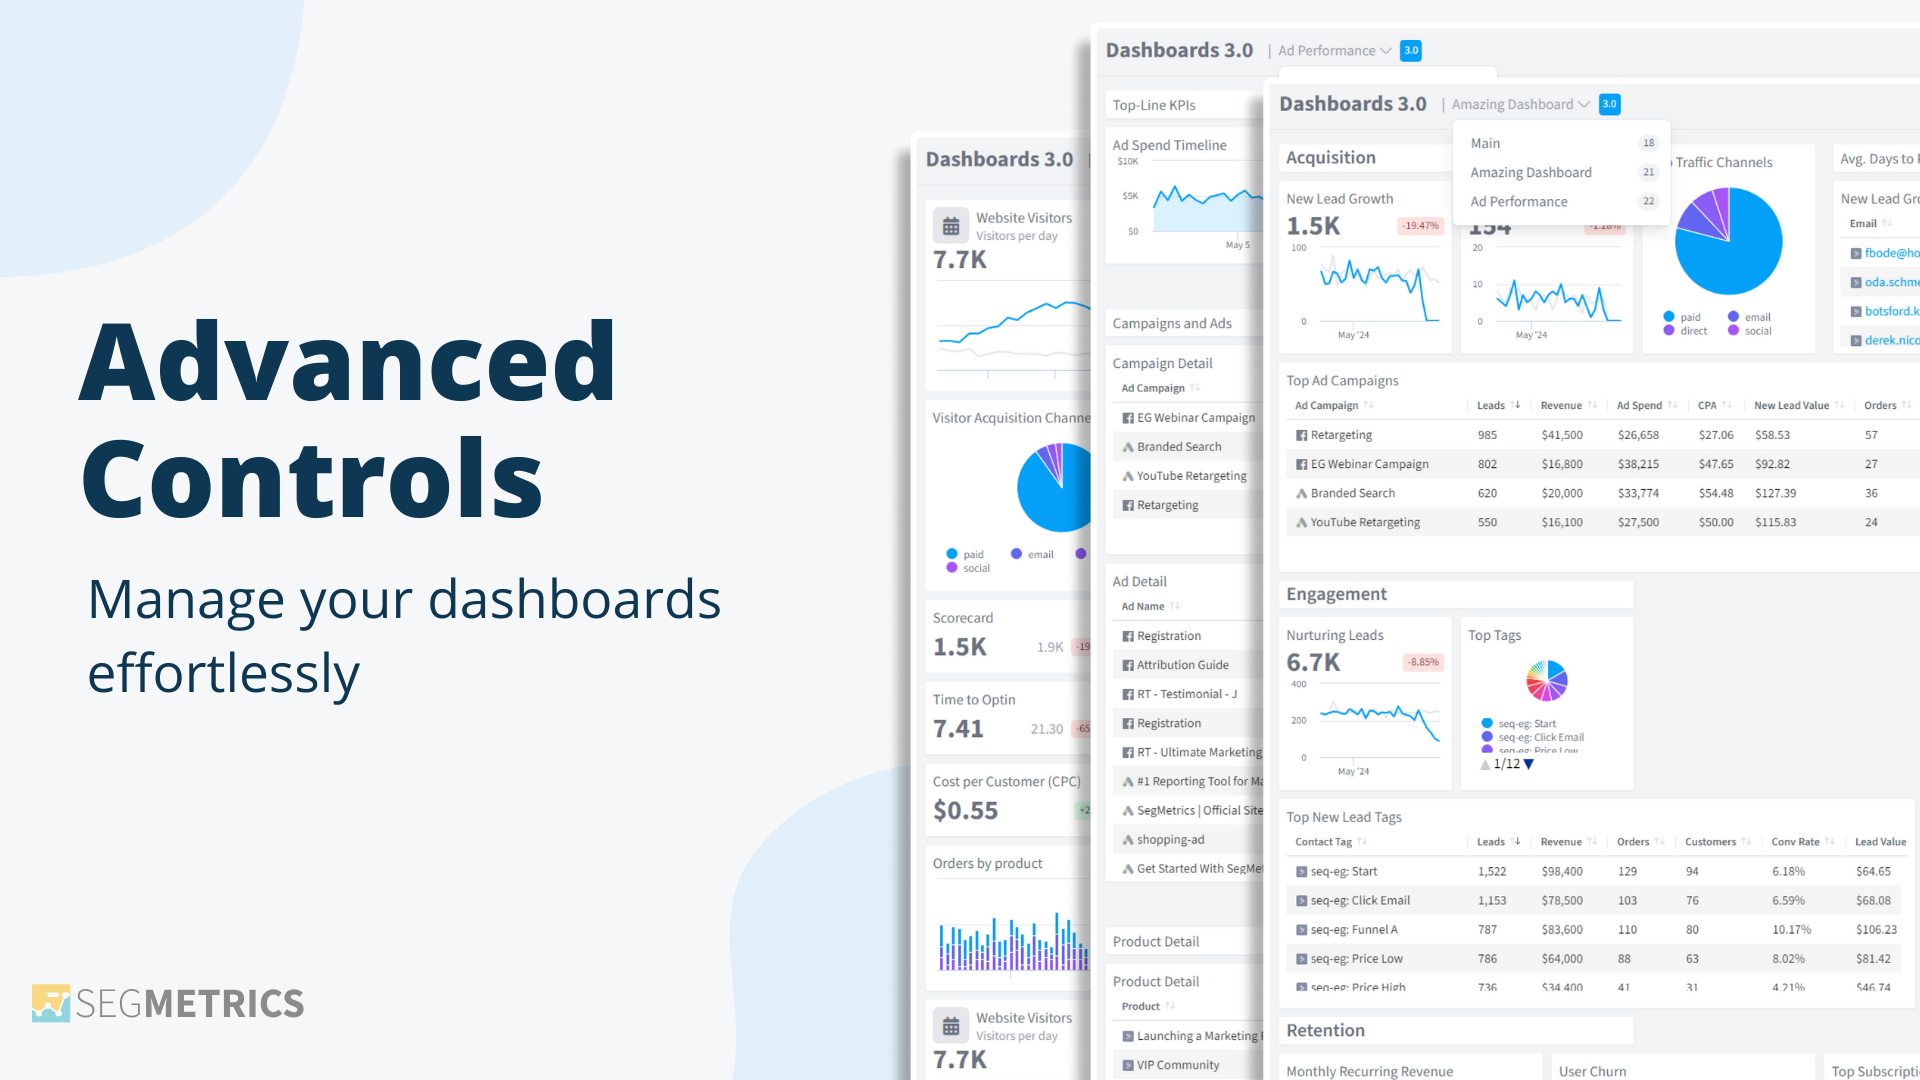 Advanced Controls - Manage your dashboards effortlessly